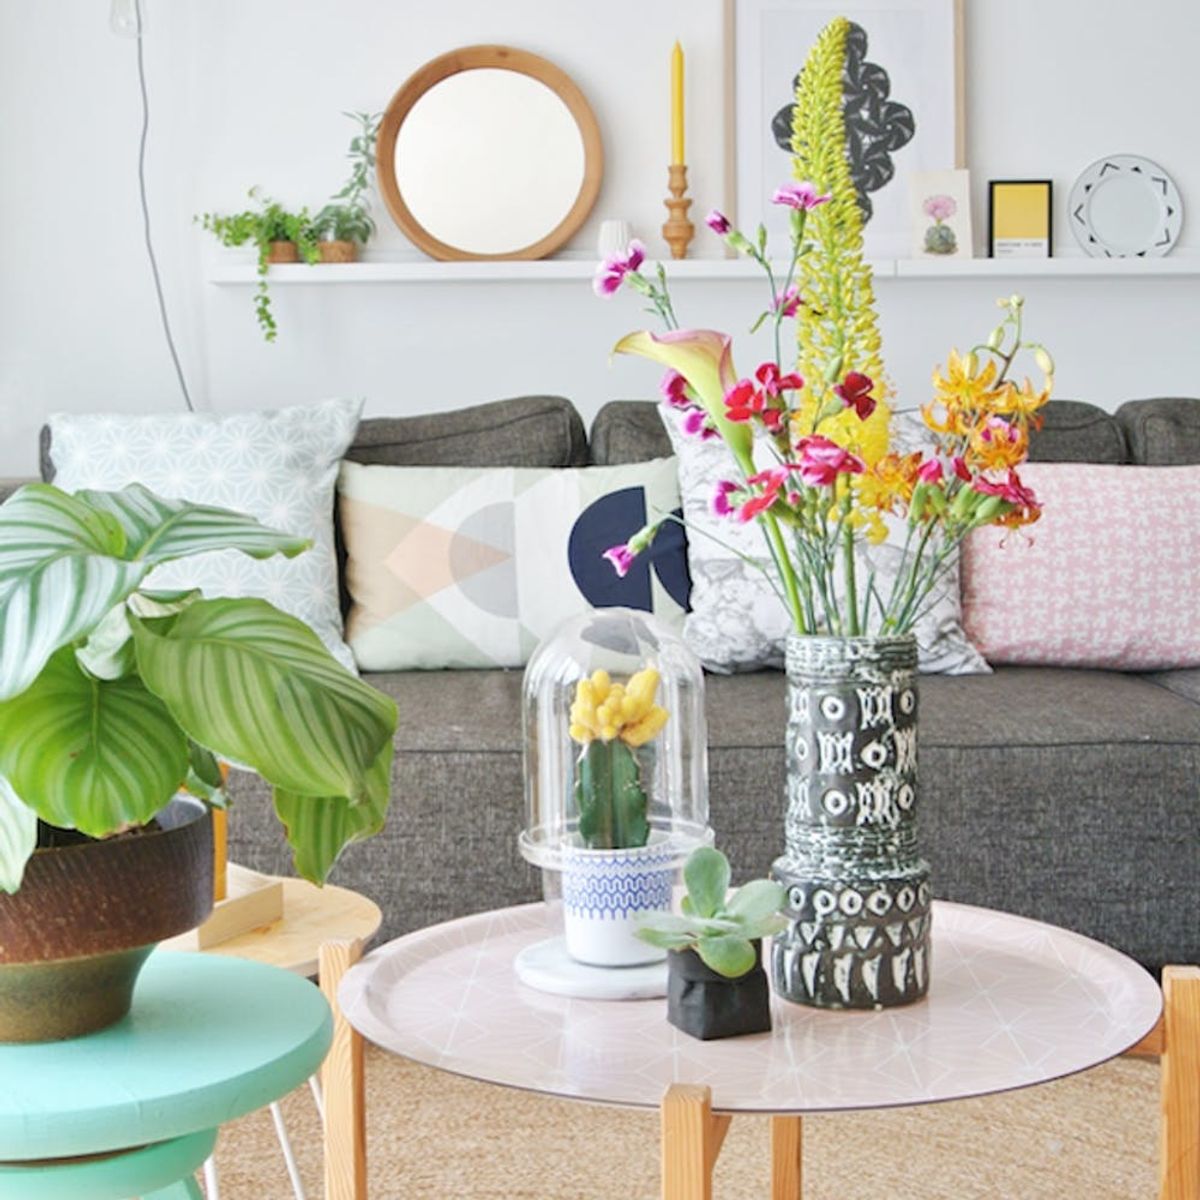 15 Colorful Scandinavian Decor Ideas for a Minimalist Spring Vibe